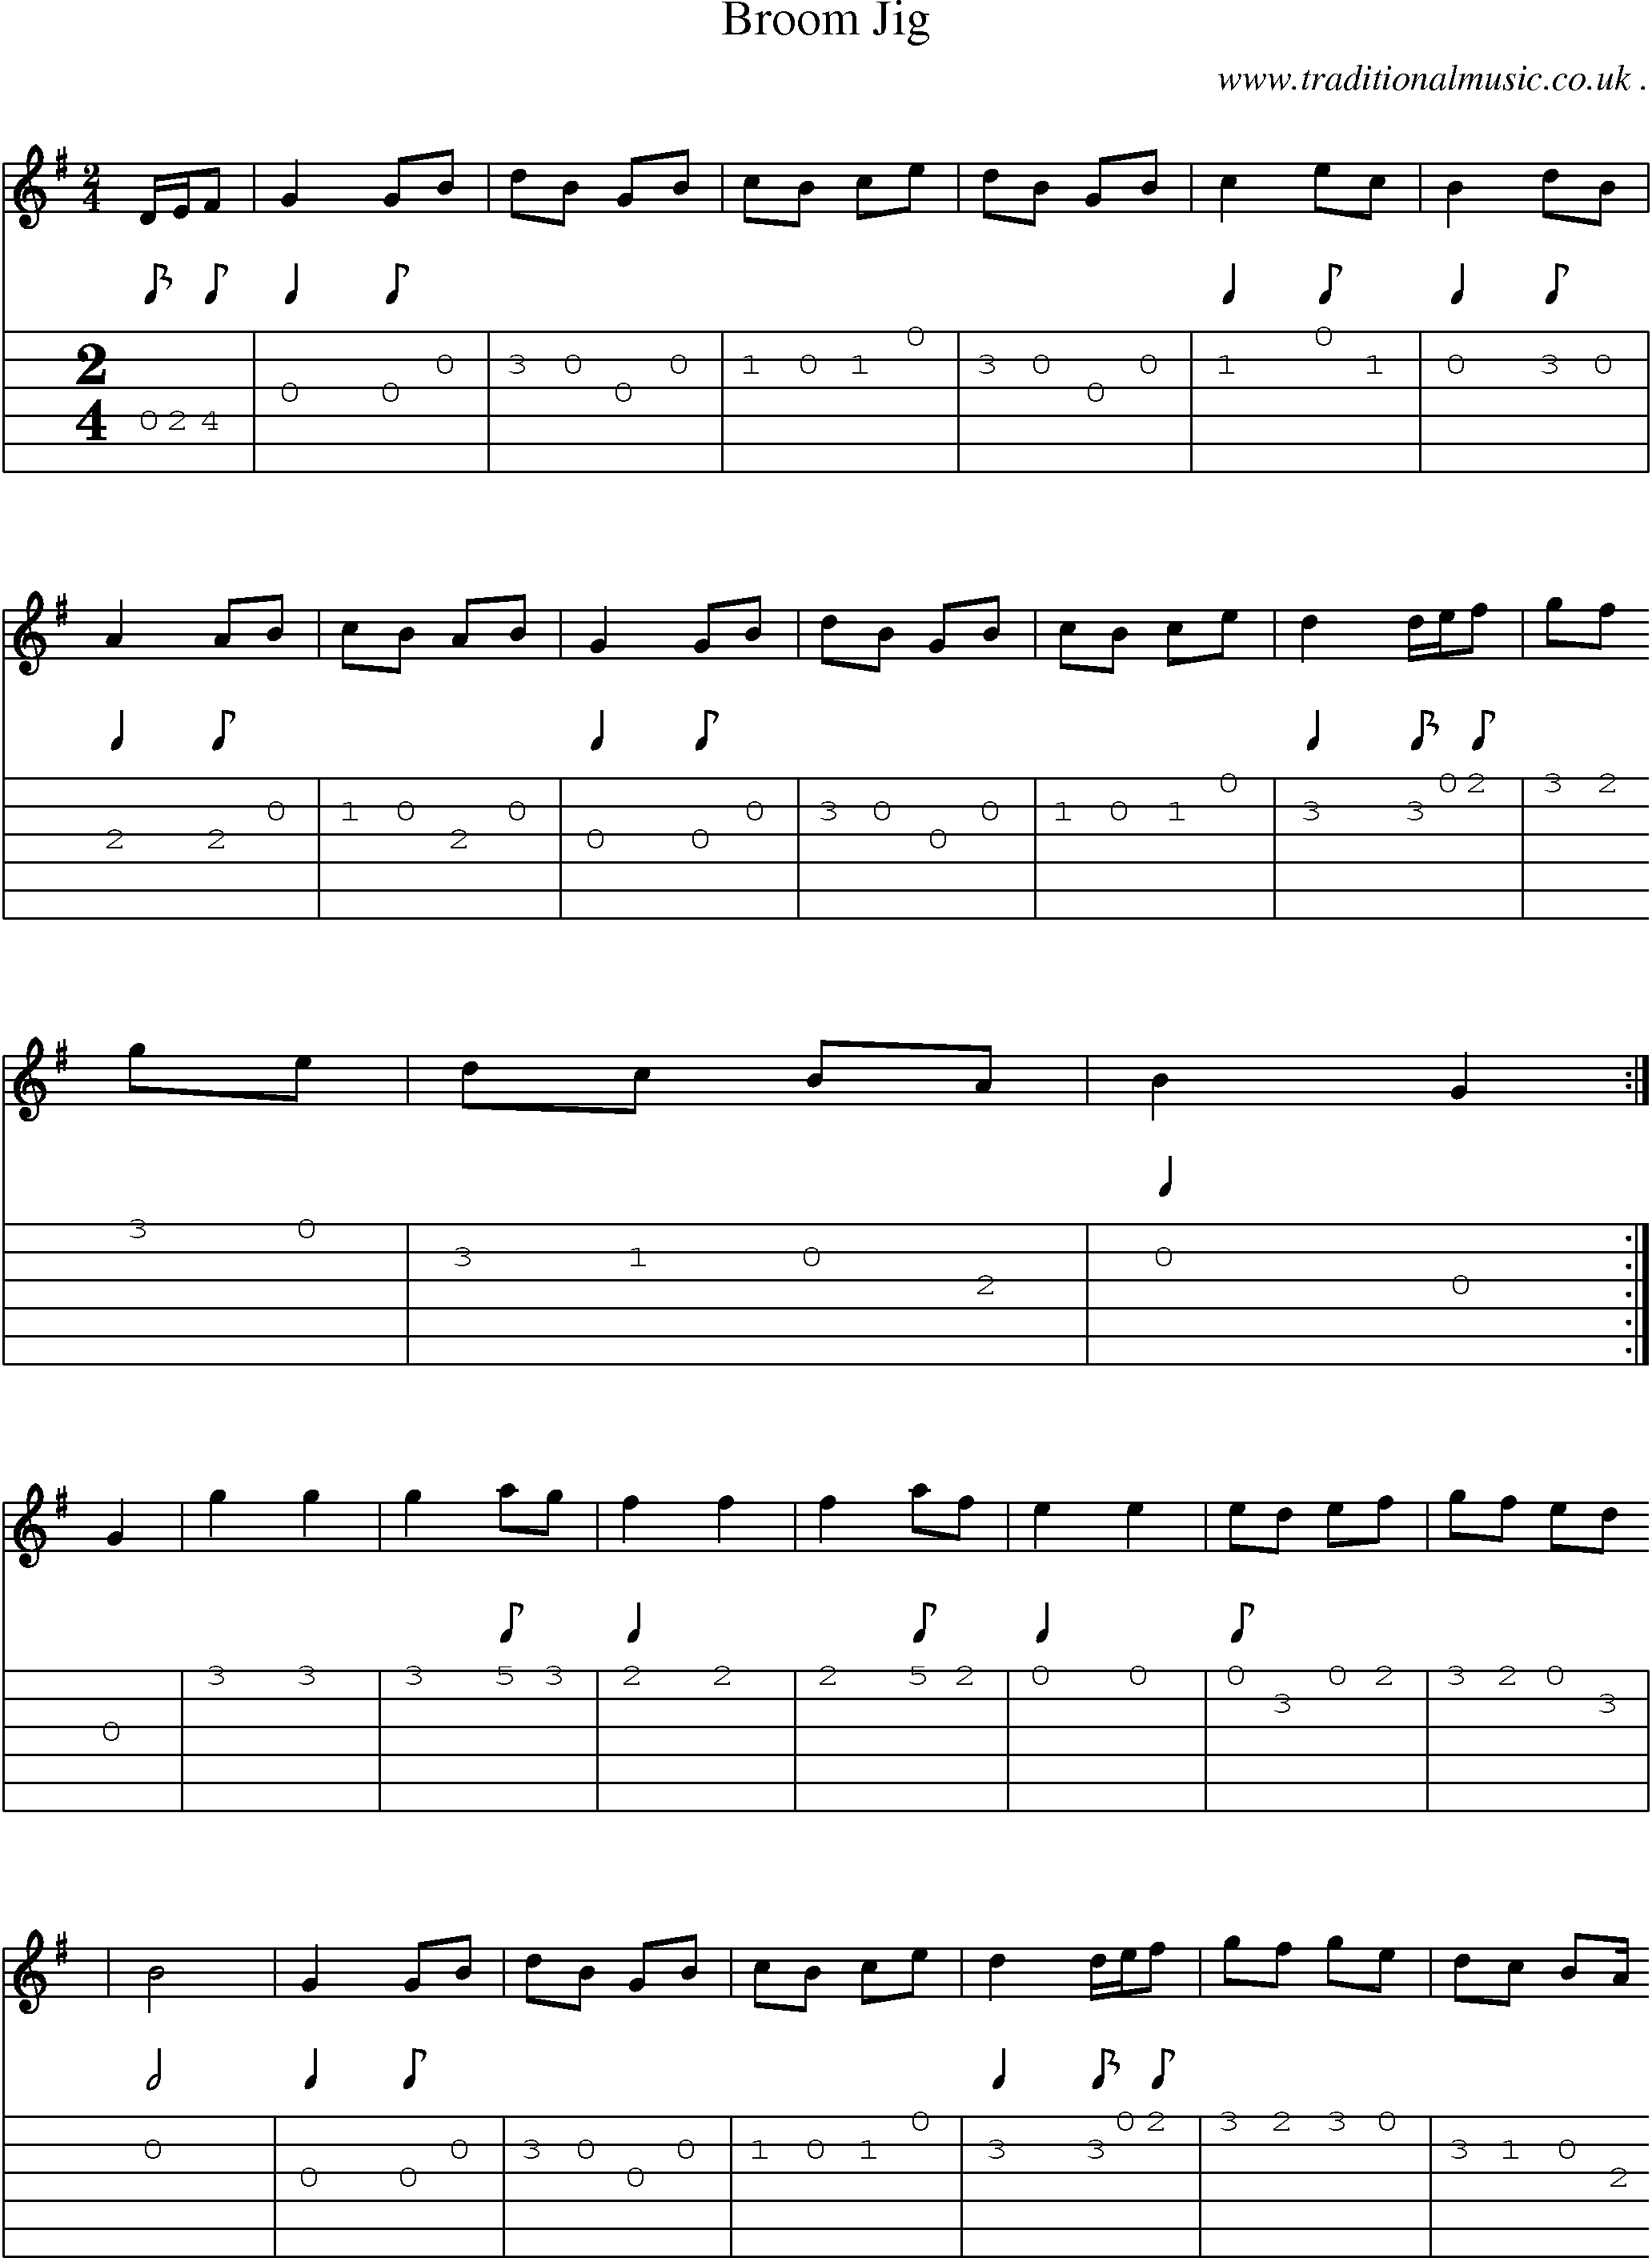 Sheet-Music and Guitar Tabs for Broom Jig